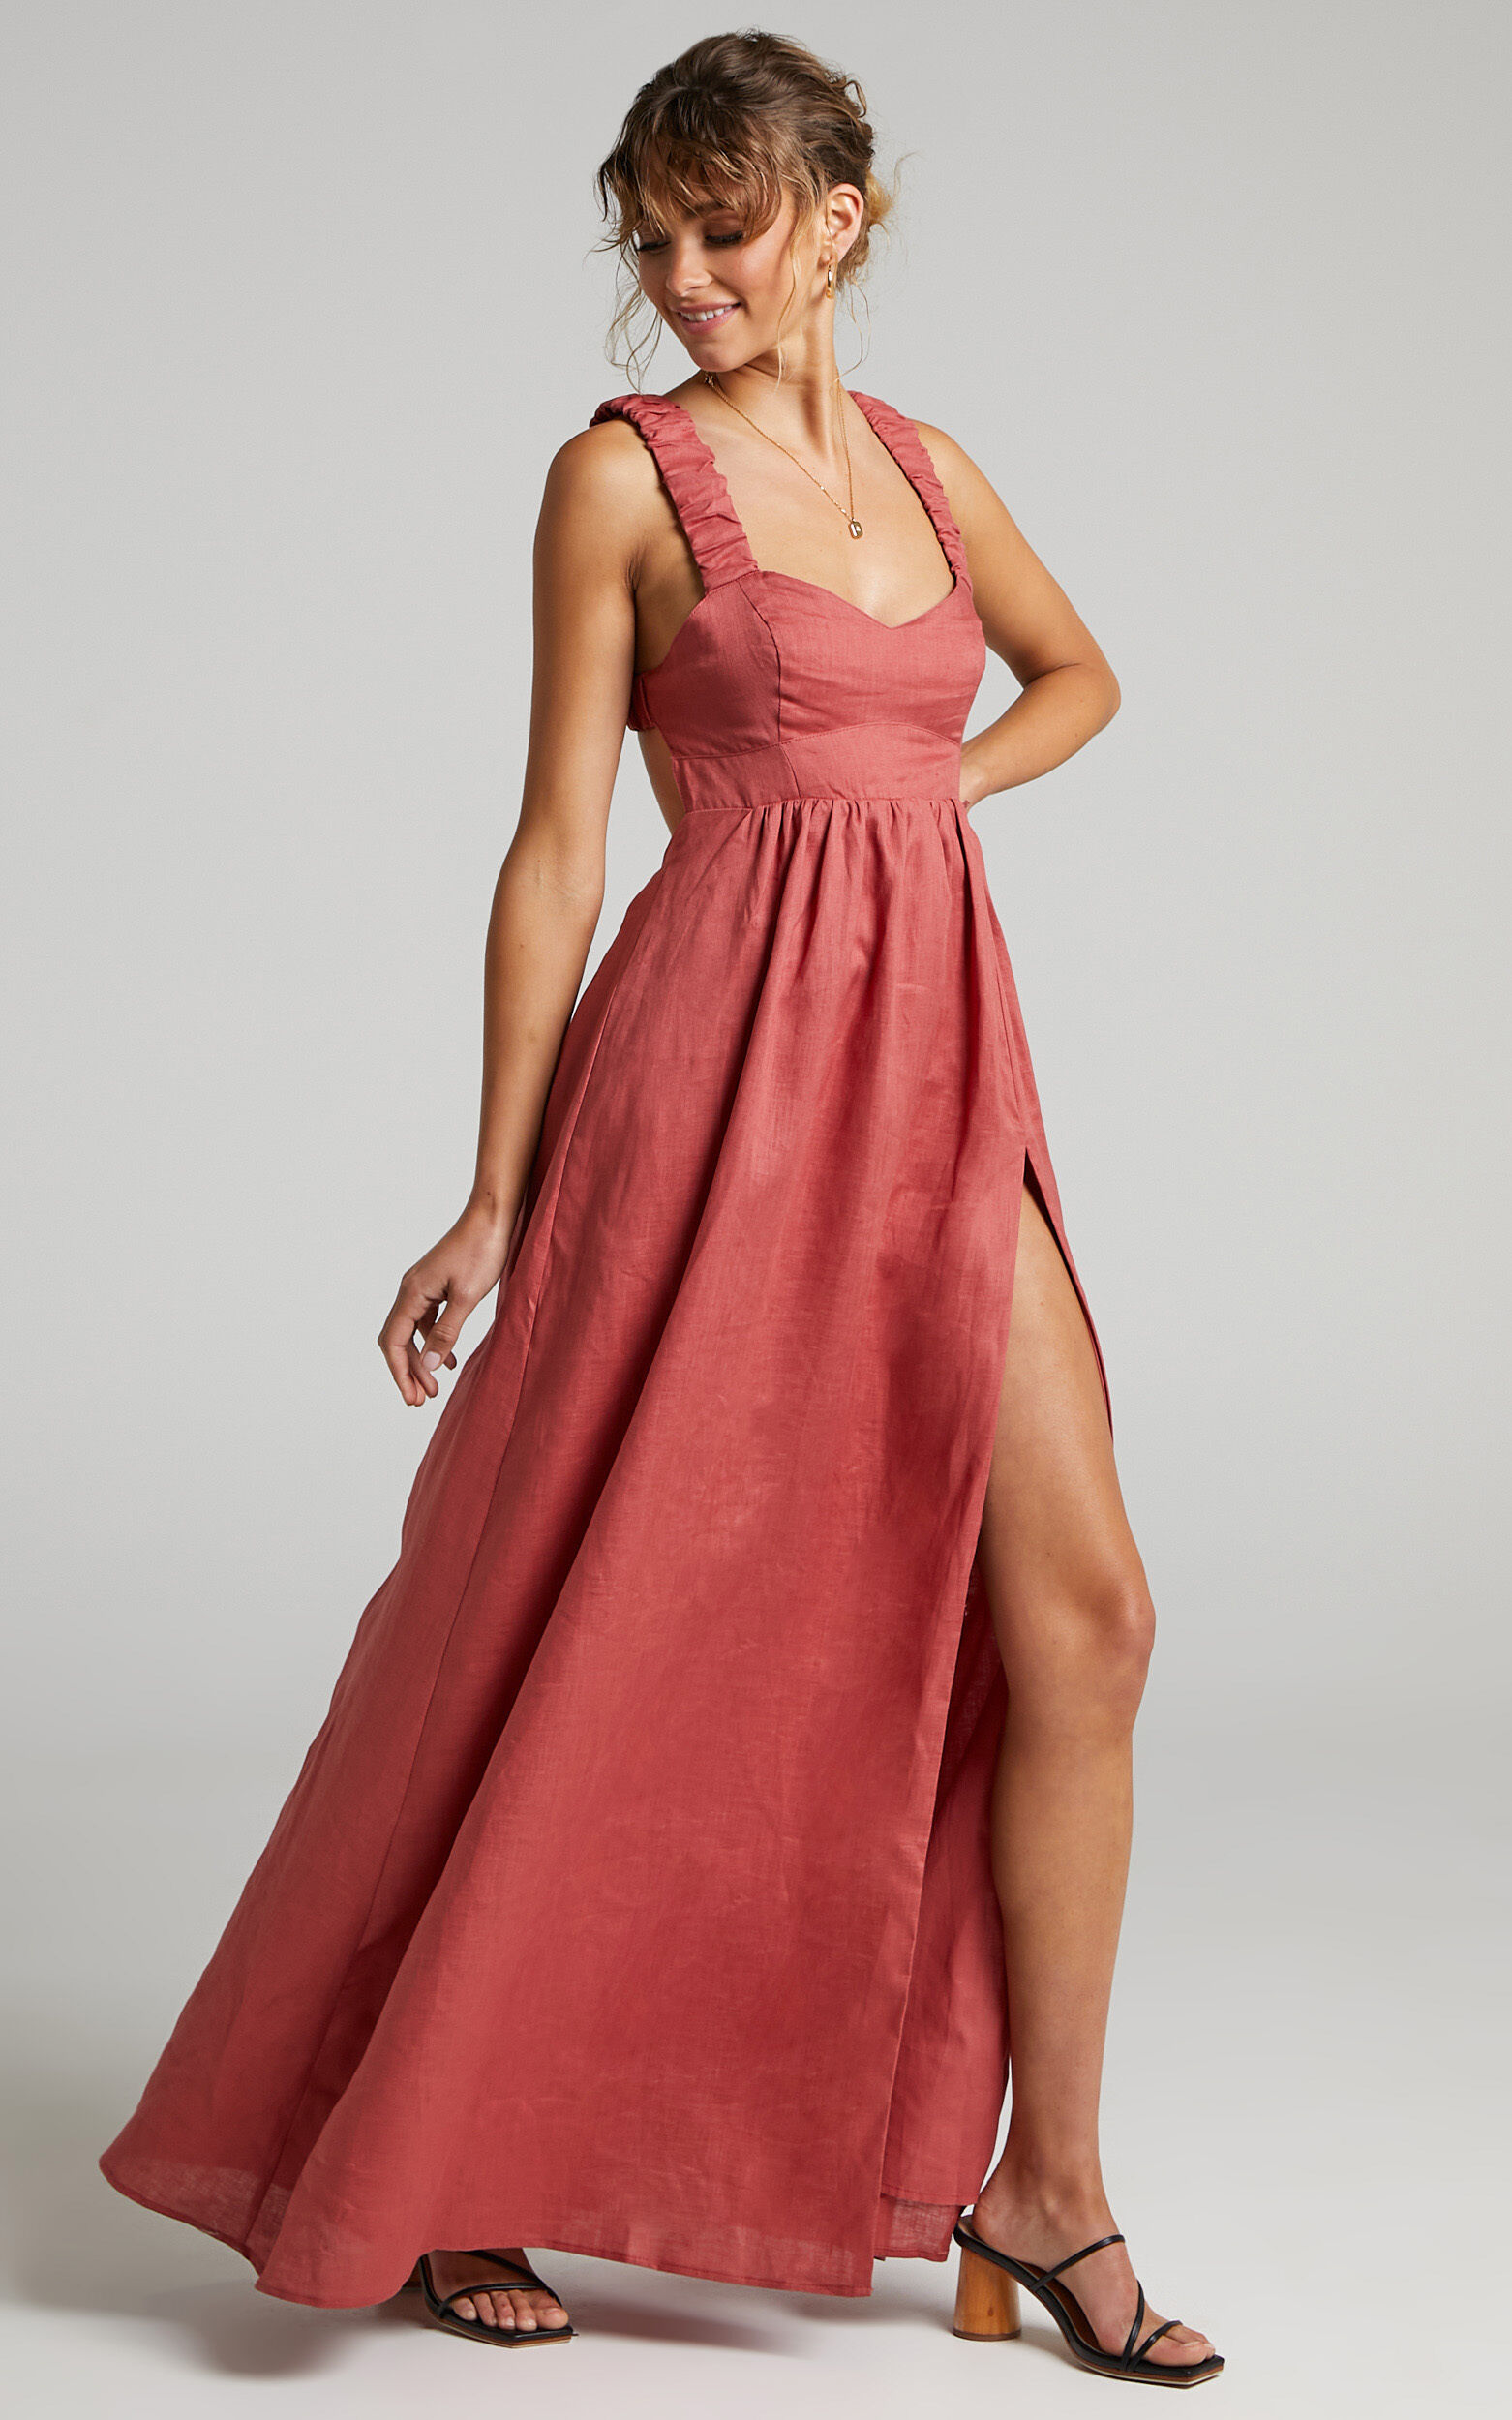 Amalie The Label - Lucianna Linen Elasticated Strap Backless Maxi Dress in Dusty Rose - 04, PNK1, super-hi-res image number null